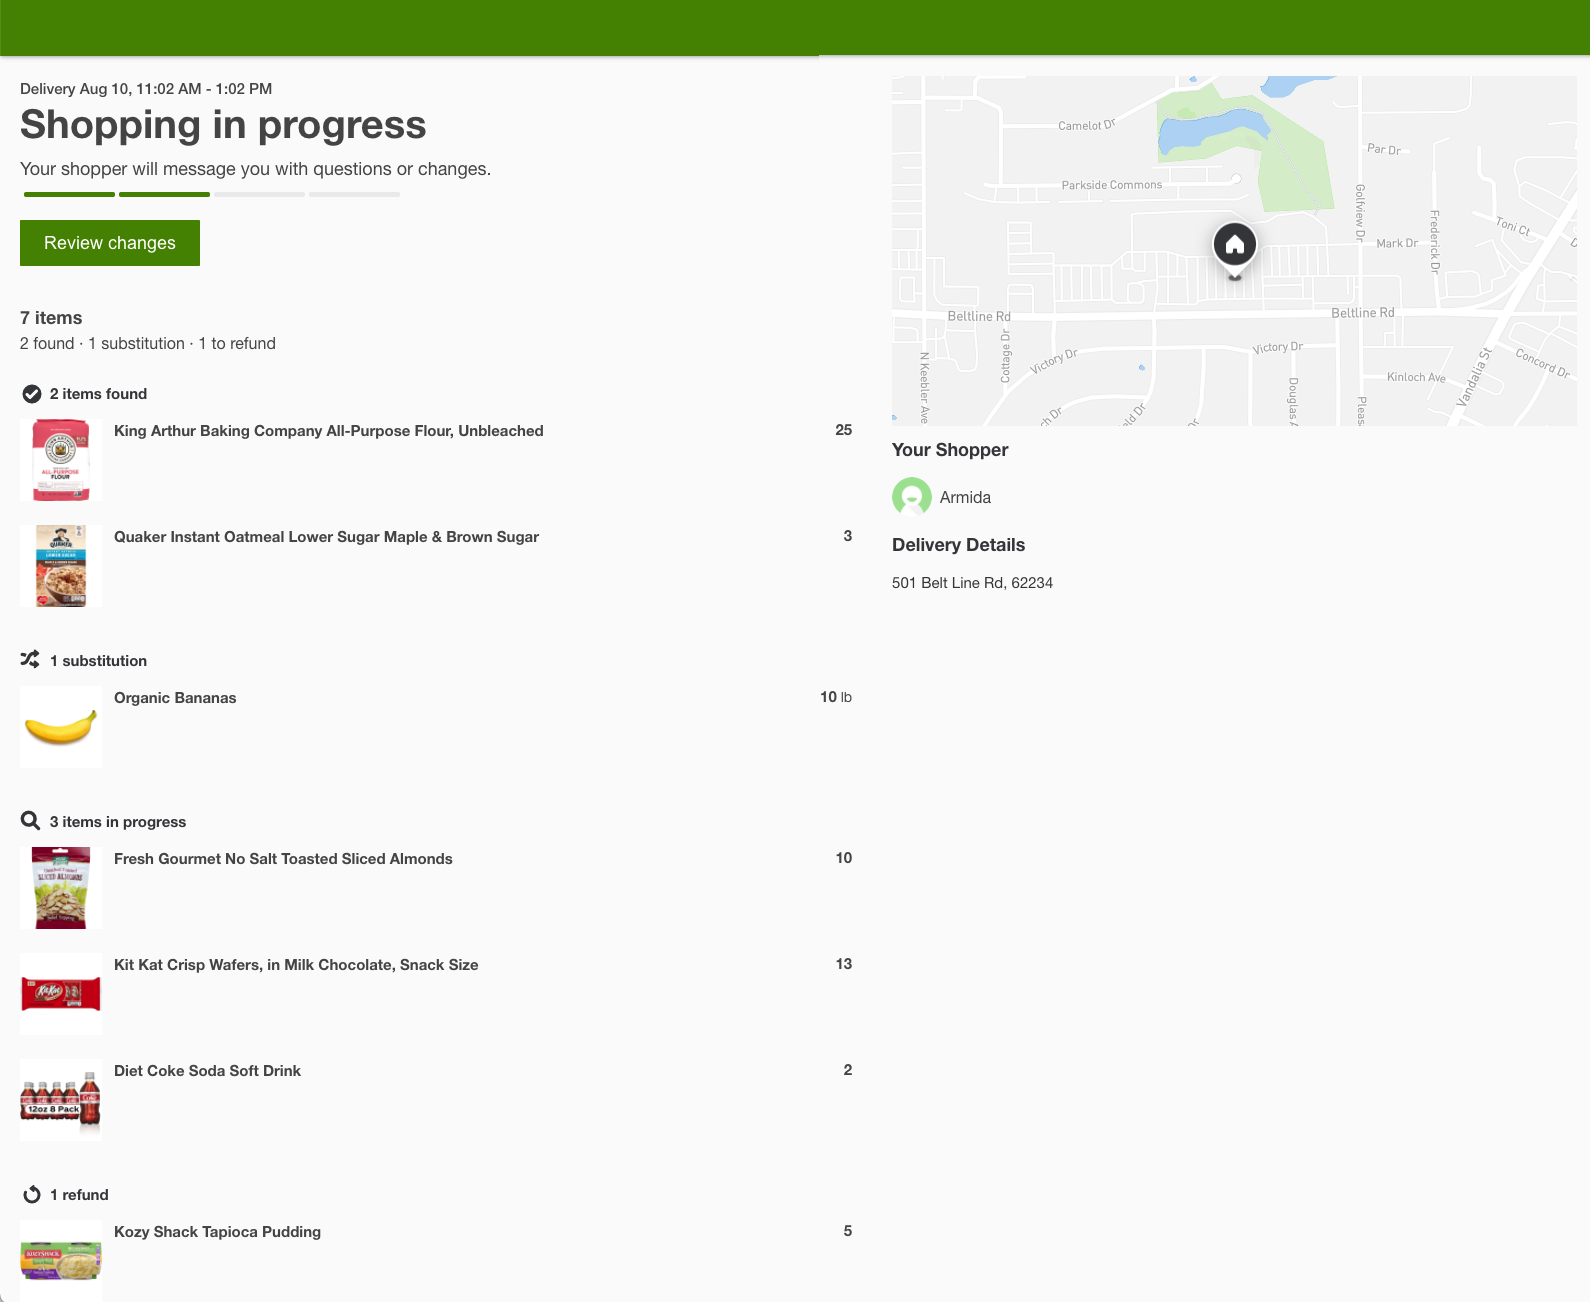 The image shows the Order Status page in a browser view. On the left is the delivery date and time, the Shopping in progress status, and the items in the order with 5 found, 1 replacement, and 1 refund. On the right is the map with both the customer and shopper locations, the shopper&#39;s name Amida, and a delivery address of 501 Belt Line Rd. 62234.